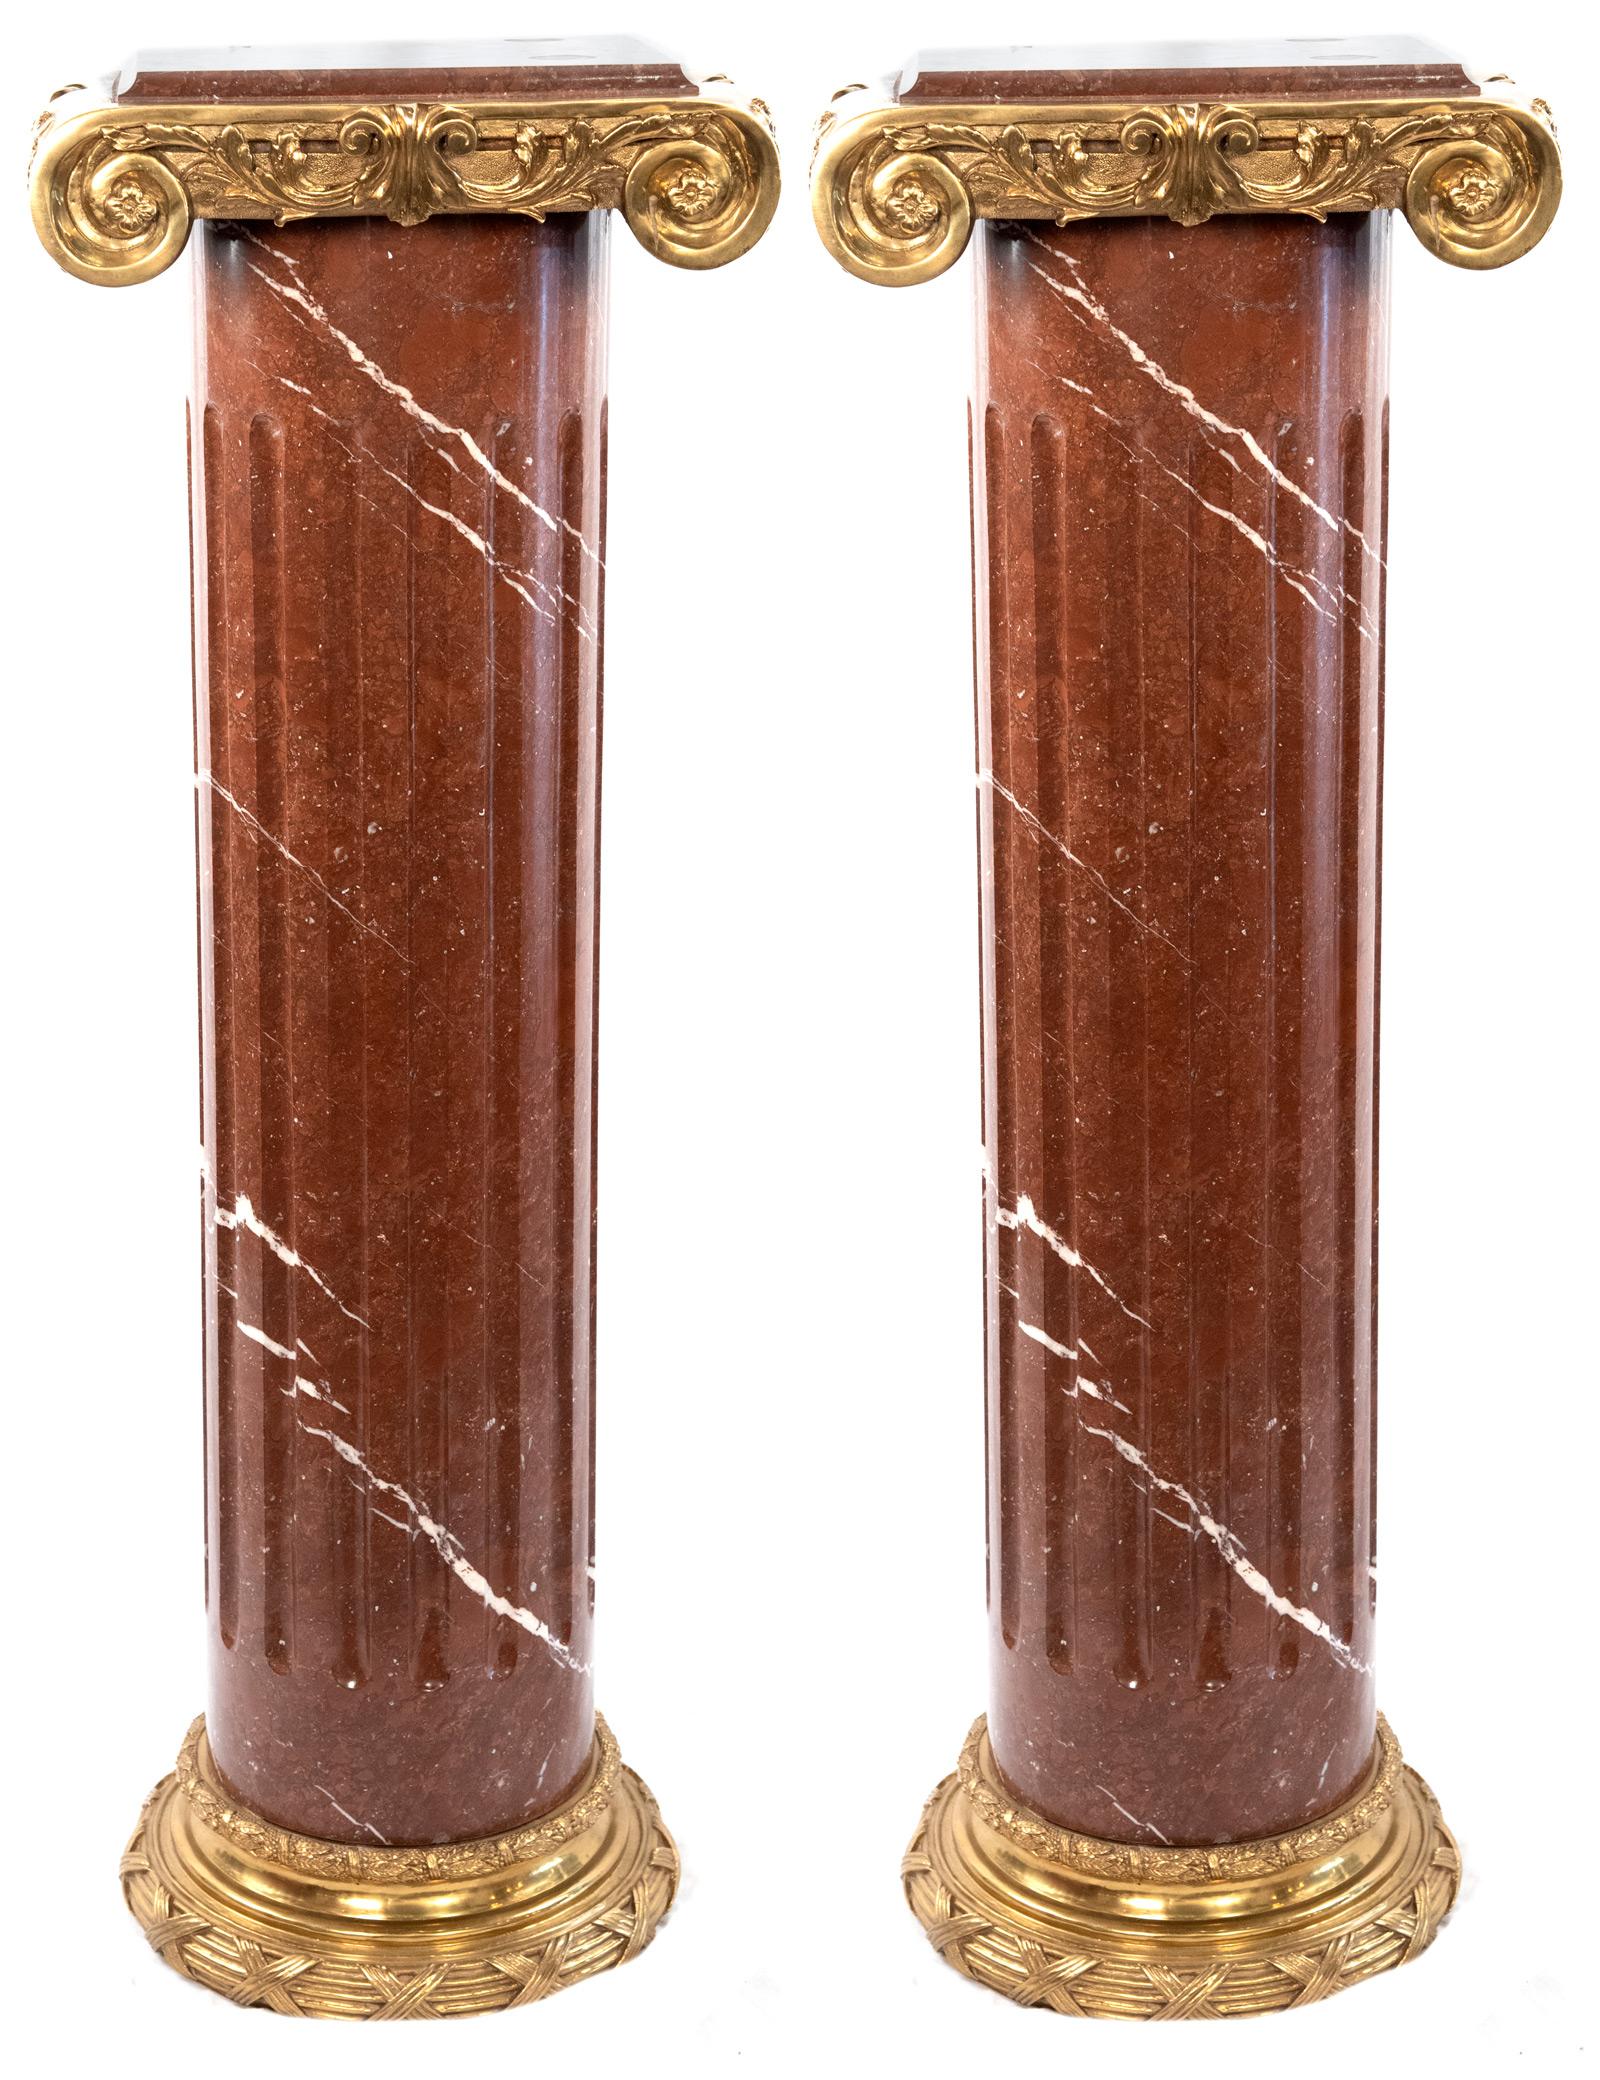 20th Century Pair of Marble and Ormolu Pedestals in the Form of an Ionic Pillar